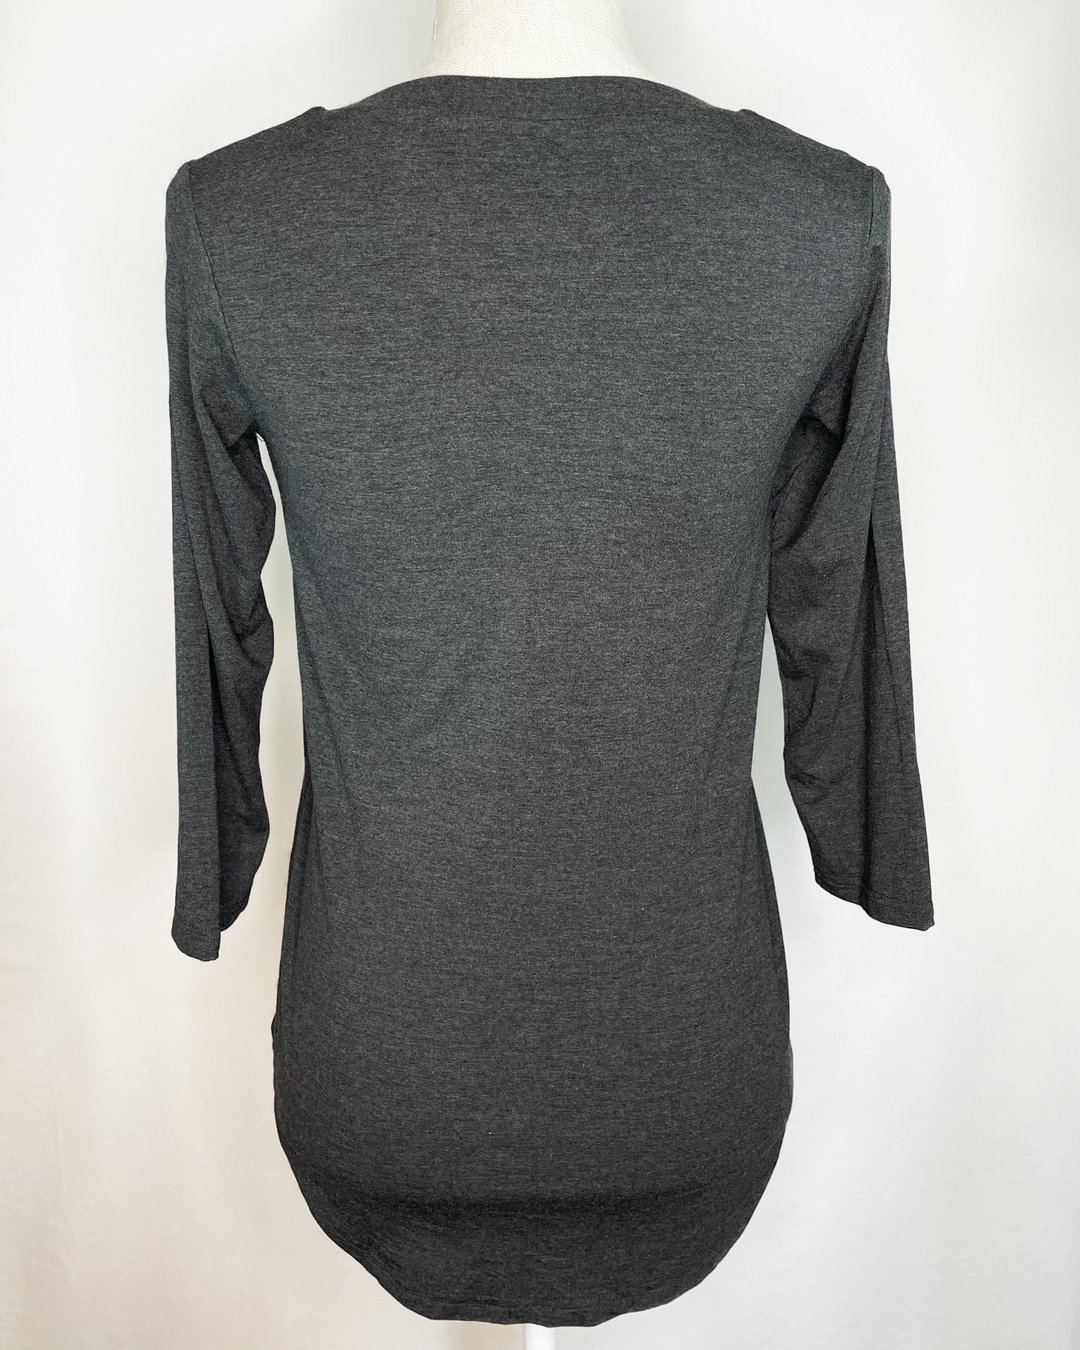 EILEEN V-Pleat Braless Bamboo 3/4 Sleeve Top back view - Charcoal color